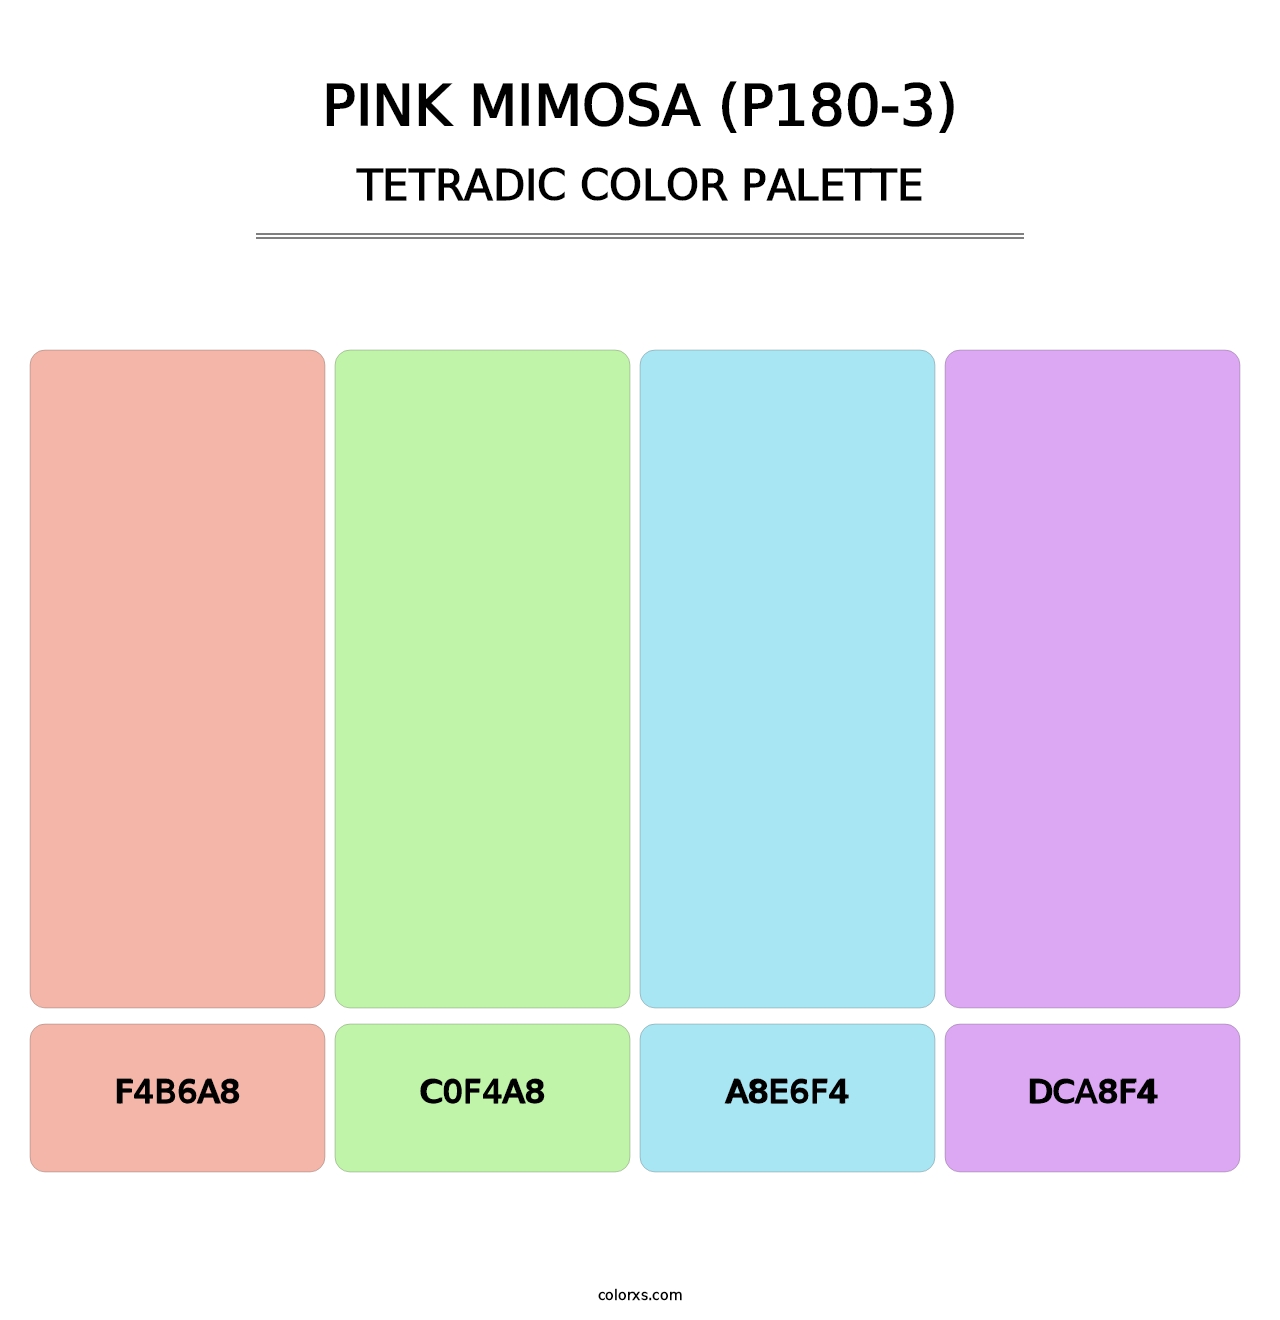 Pink Mimosa (P180-3) - Tetradic Color Palette